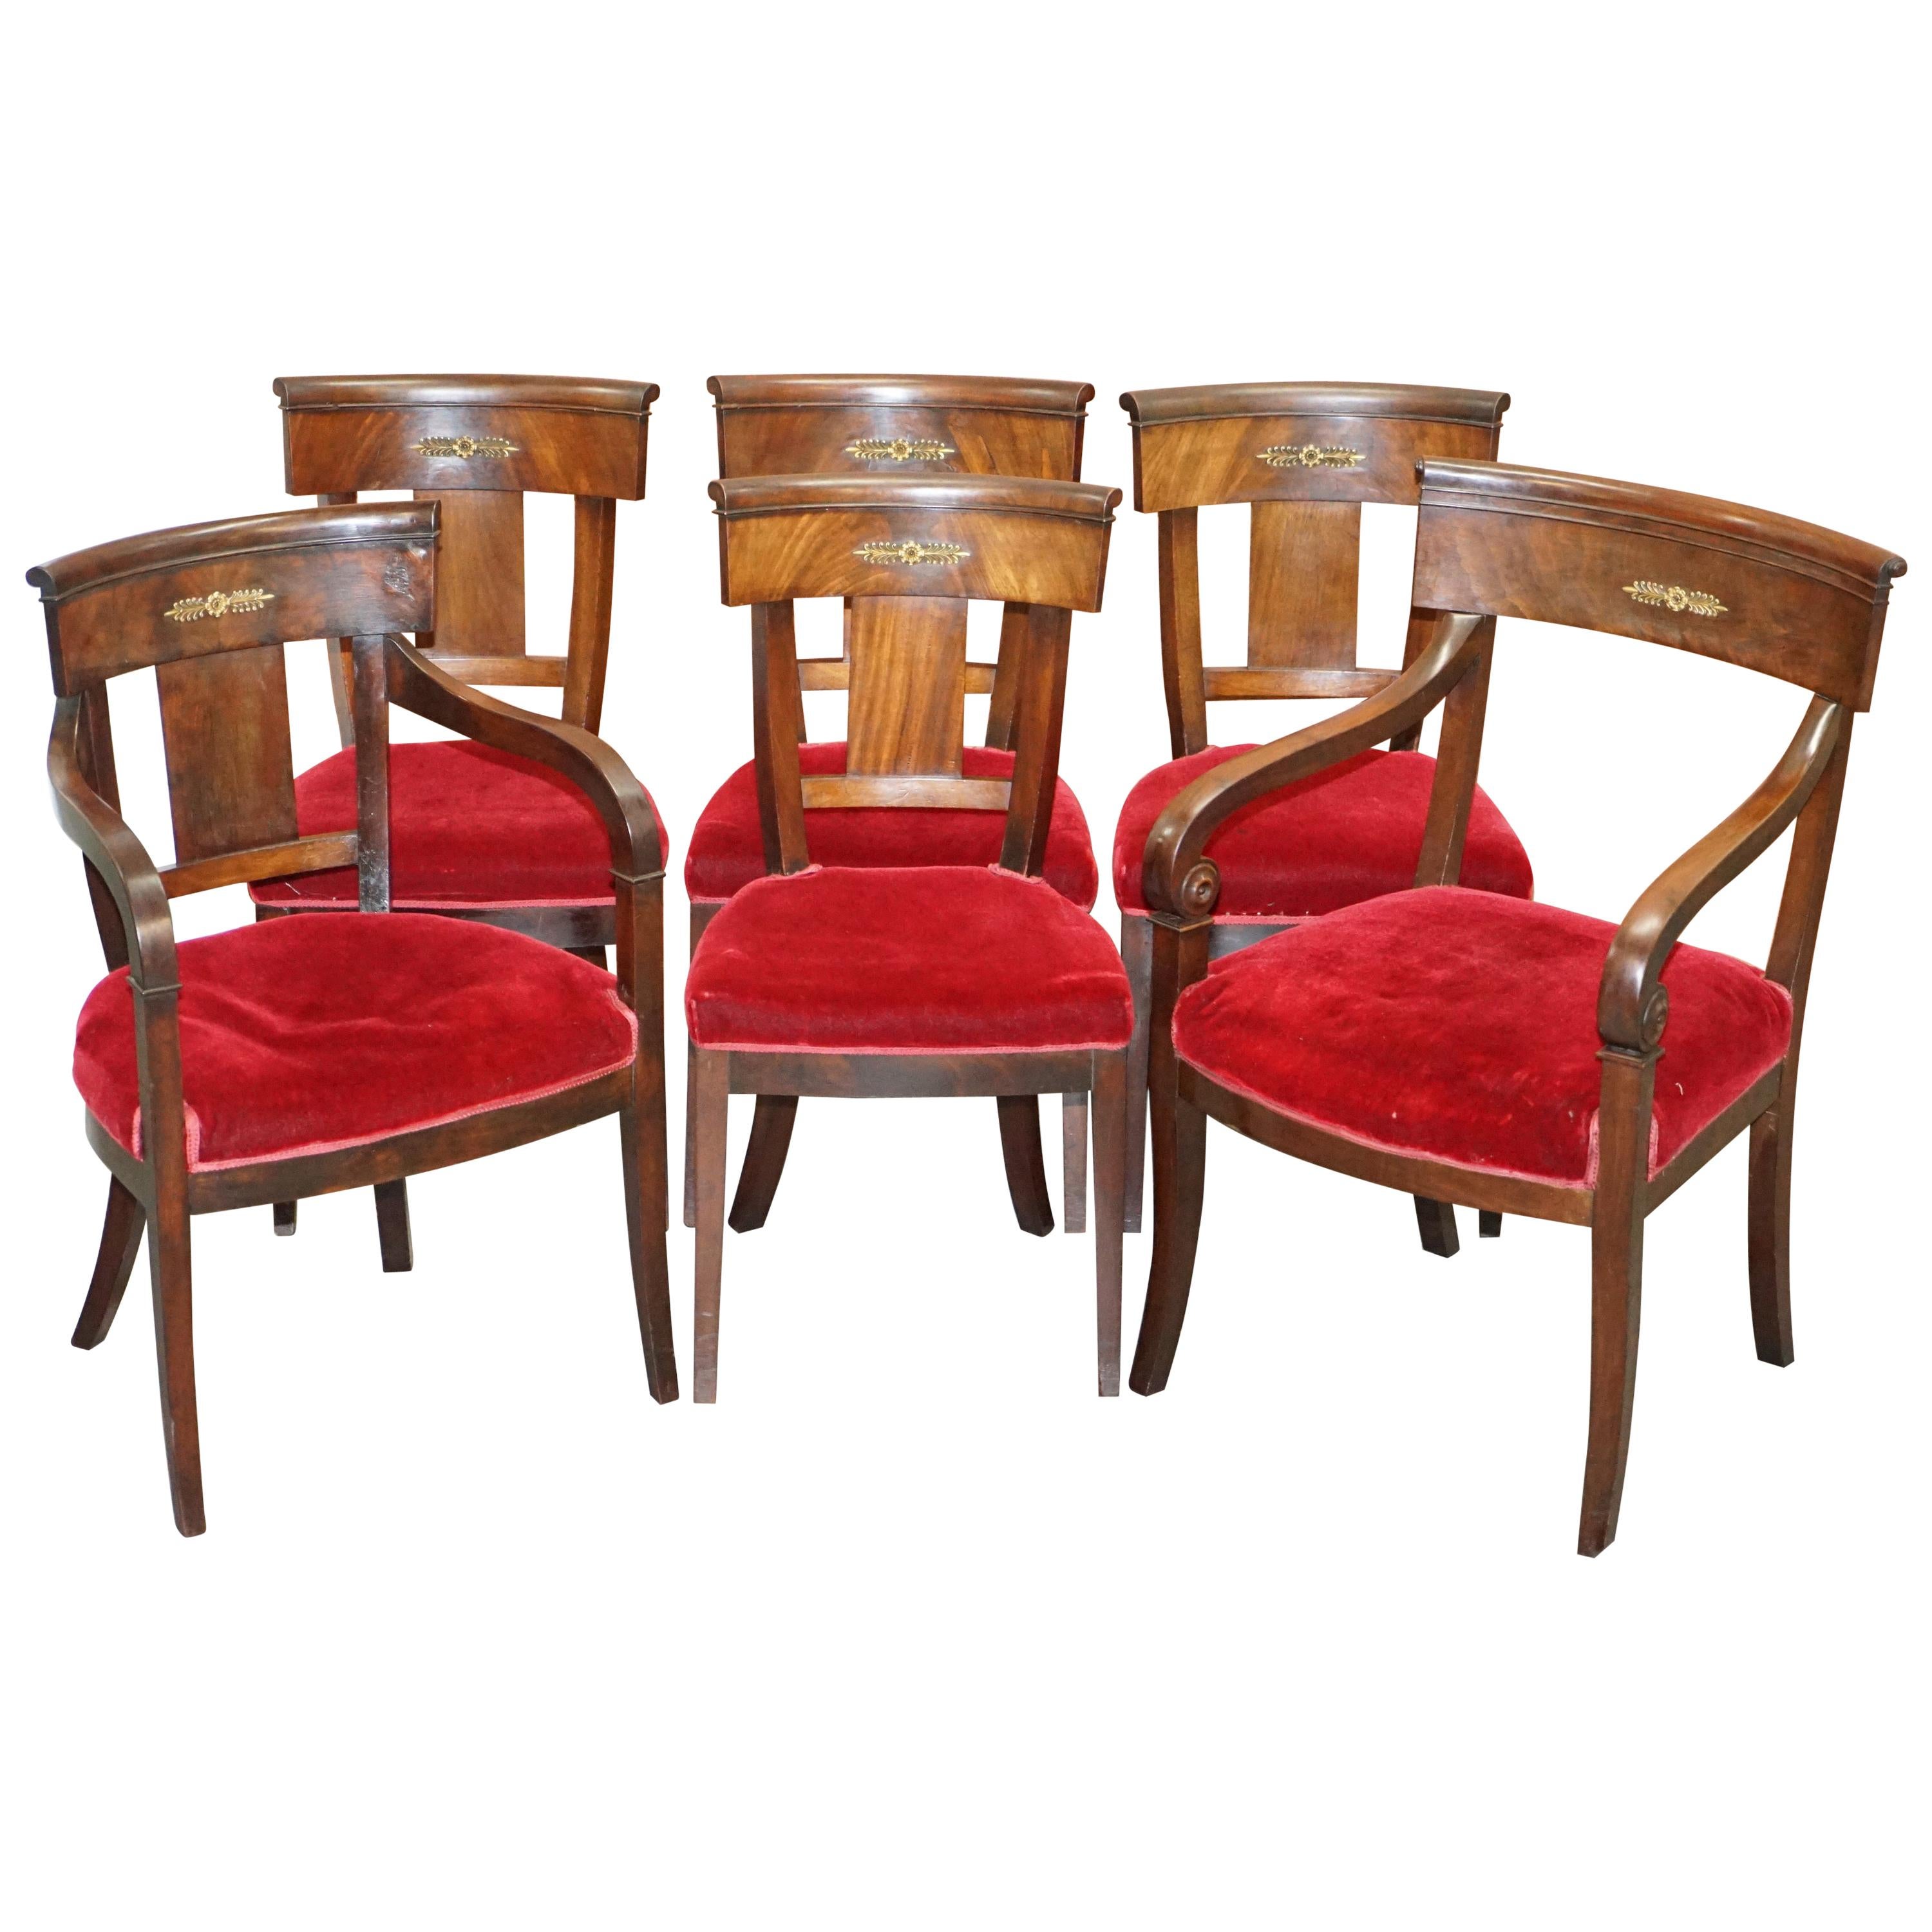 Suite of 6 Napoleon III French Empire Revival Dining Chairs Hardwood and Bronze